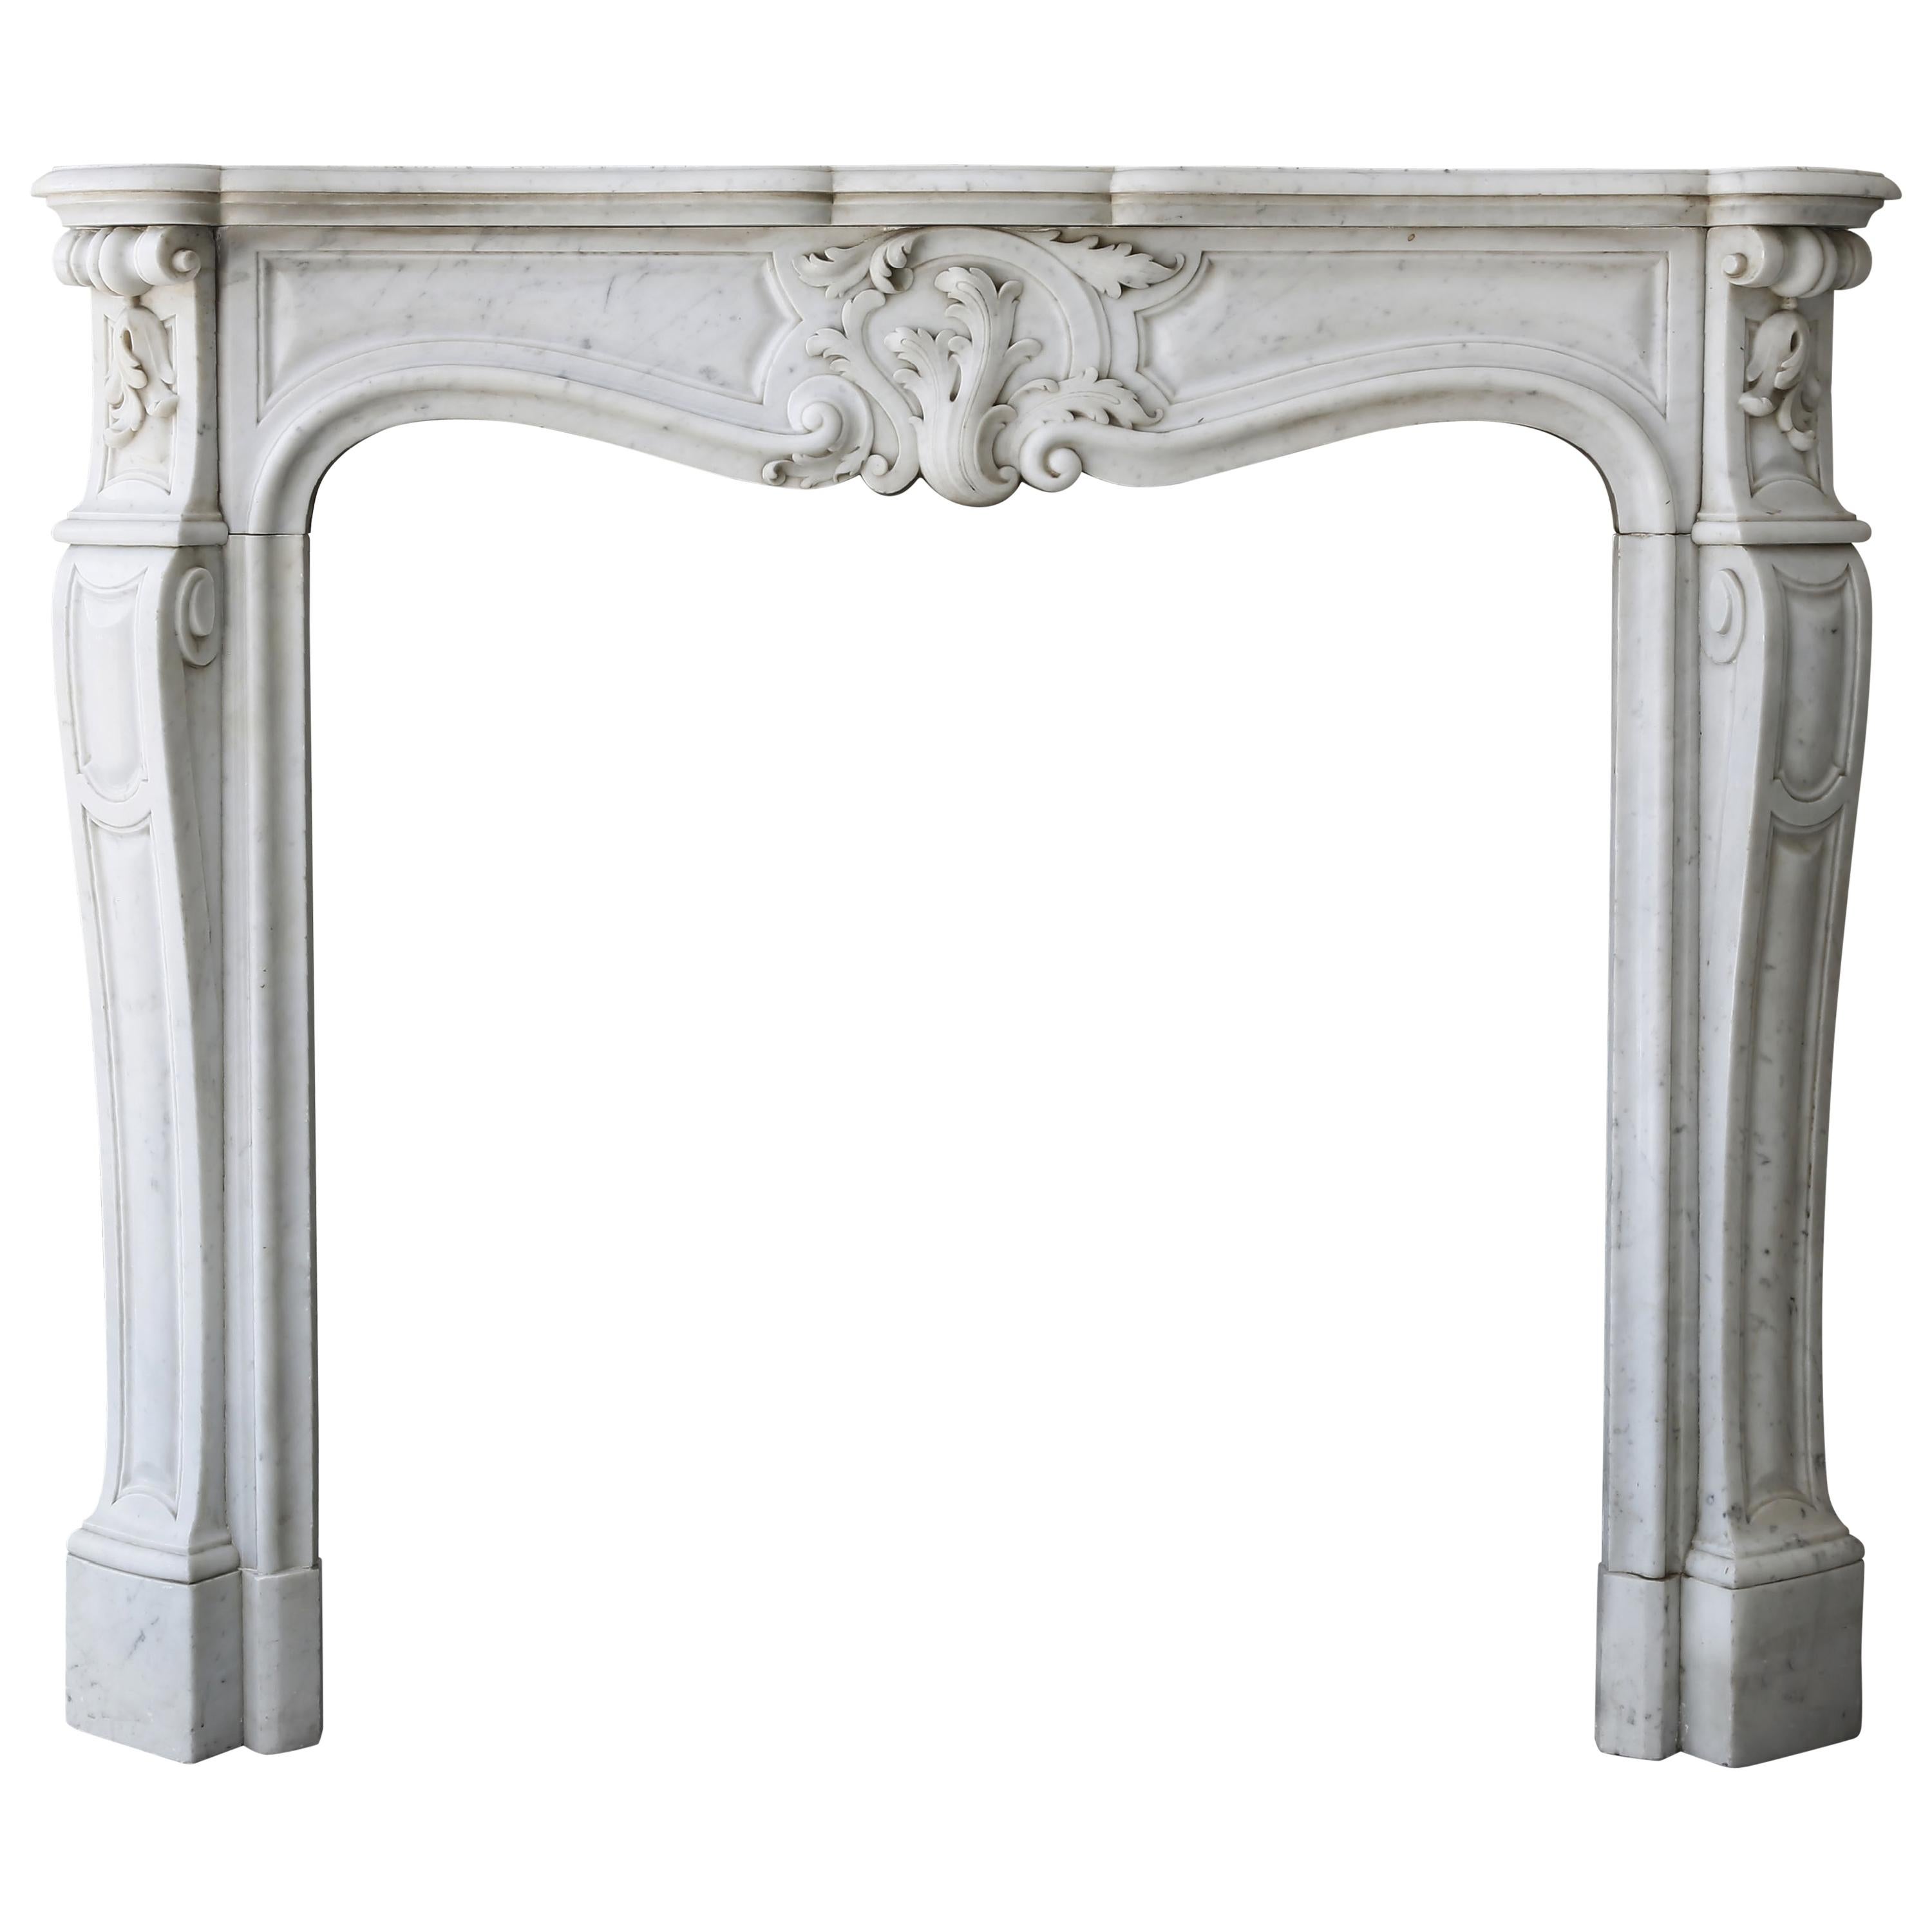 Antique White Marble Fireplace, Louis XV, 19th Century